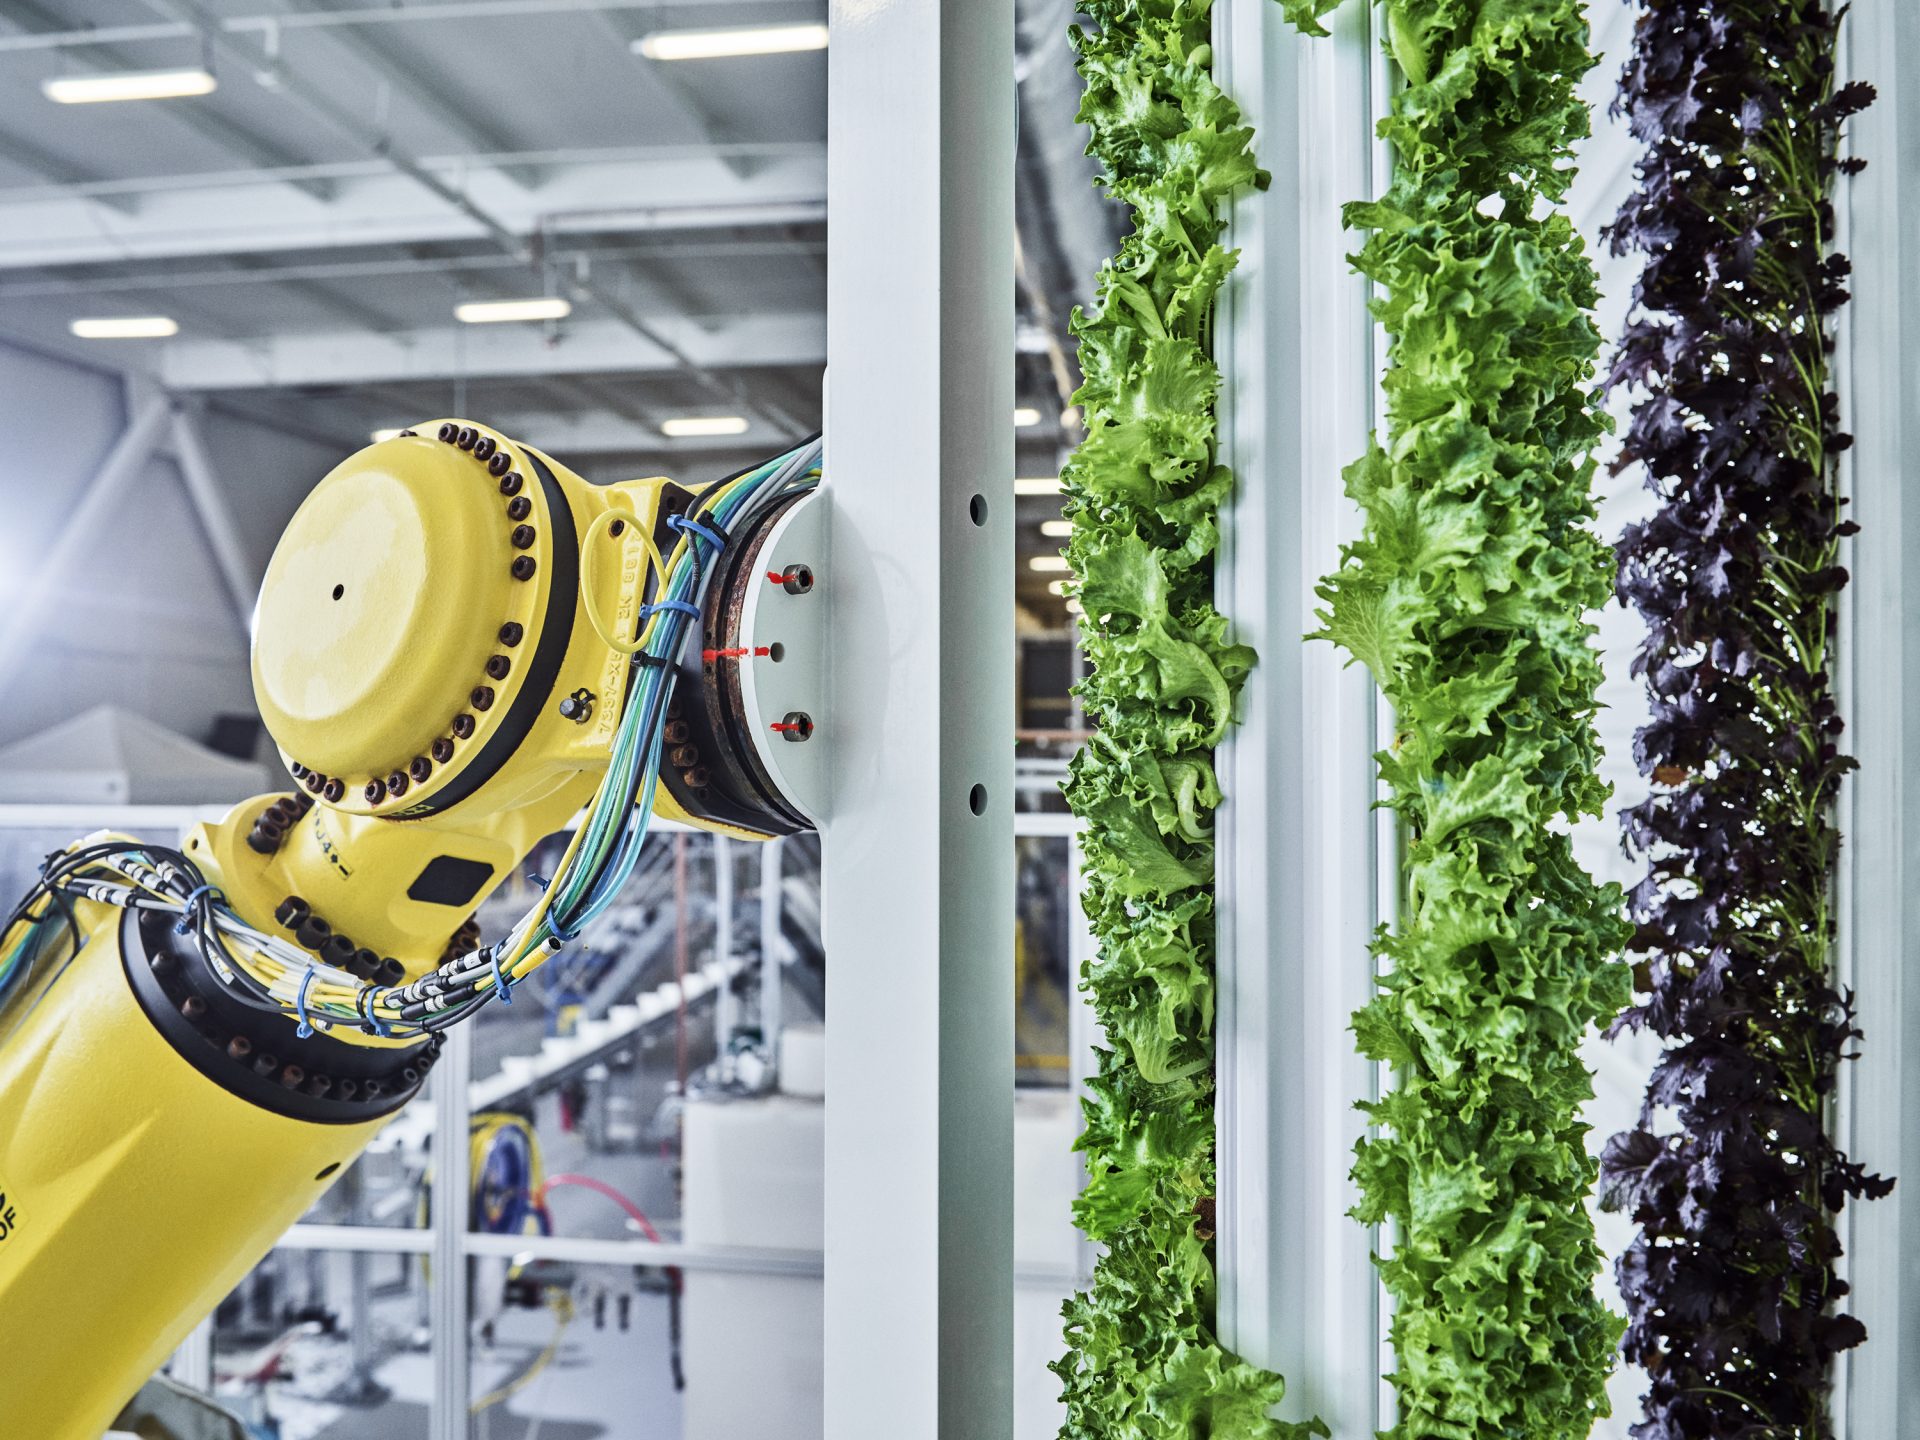 Reuters: Realty Income to invest $1 bln for vertical farming with startup Plenty